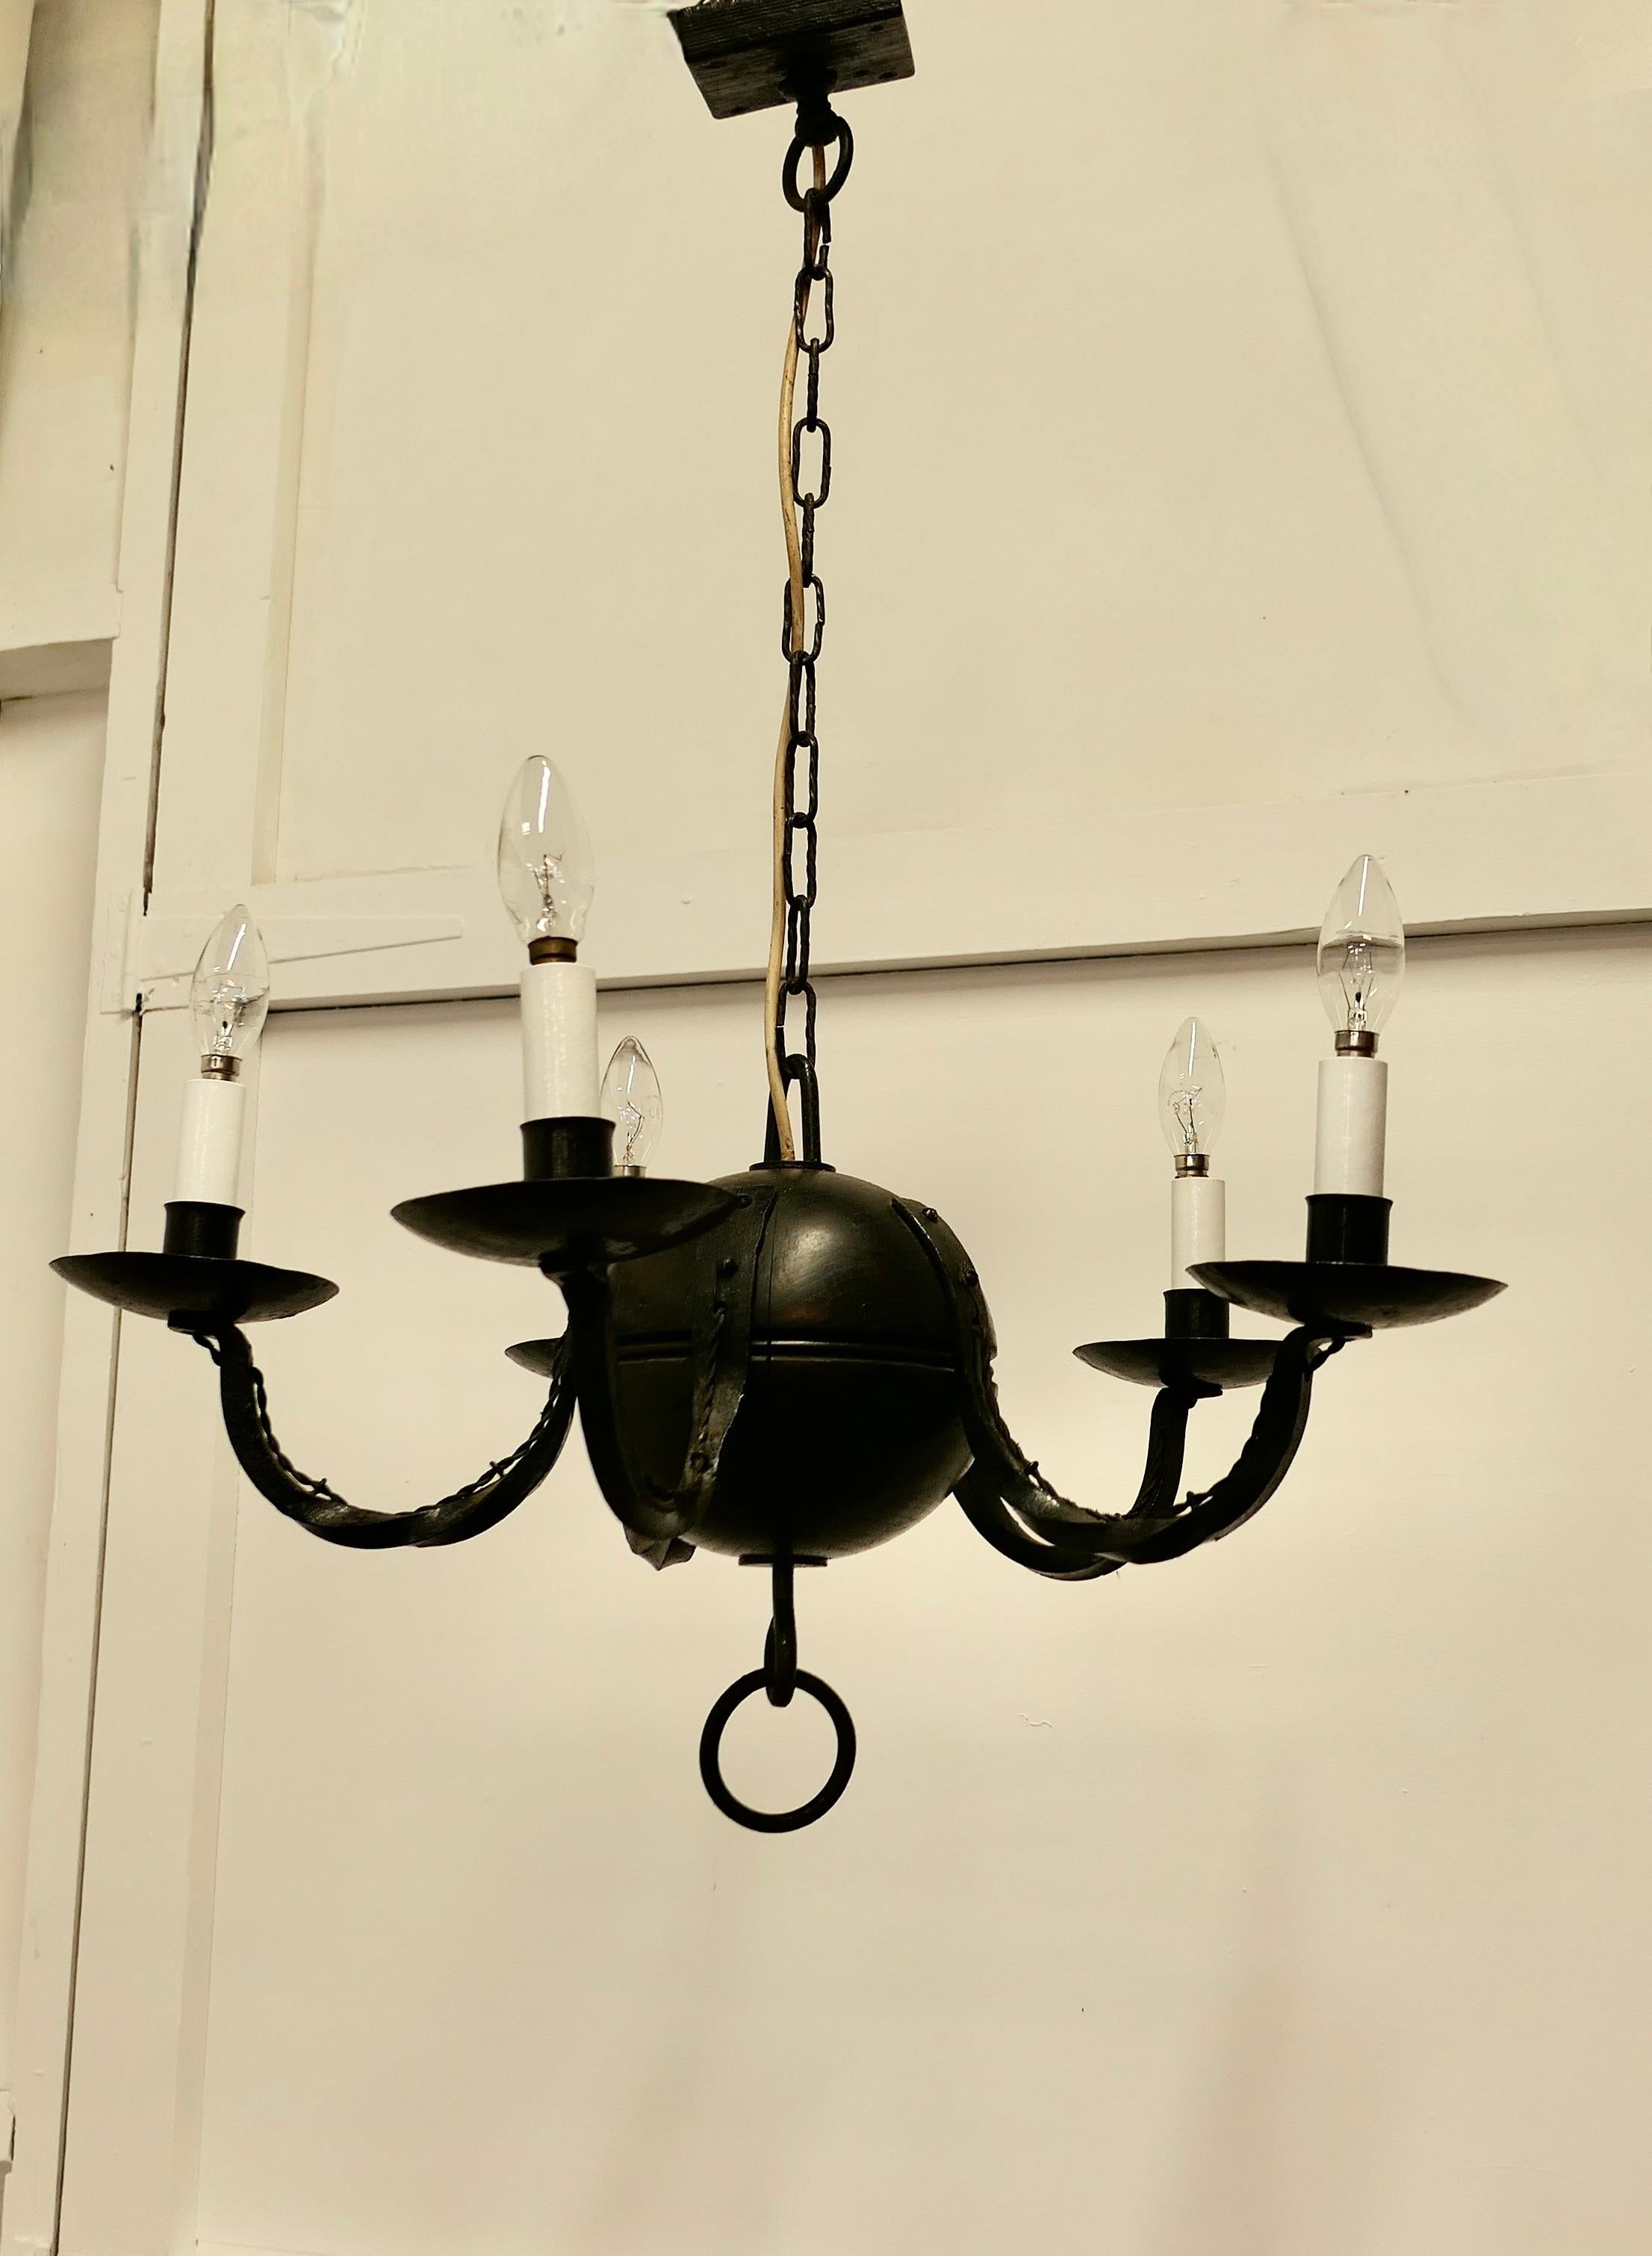 A Superb Gothic Iron and Wood Chandelier

A very handsome piece, Large Heavy and very Gothic in design, the light
has 5 wide branches and would enhance the entrance of any Gothic Doorway or light the Hallway of a Castle  

The Light is sound and